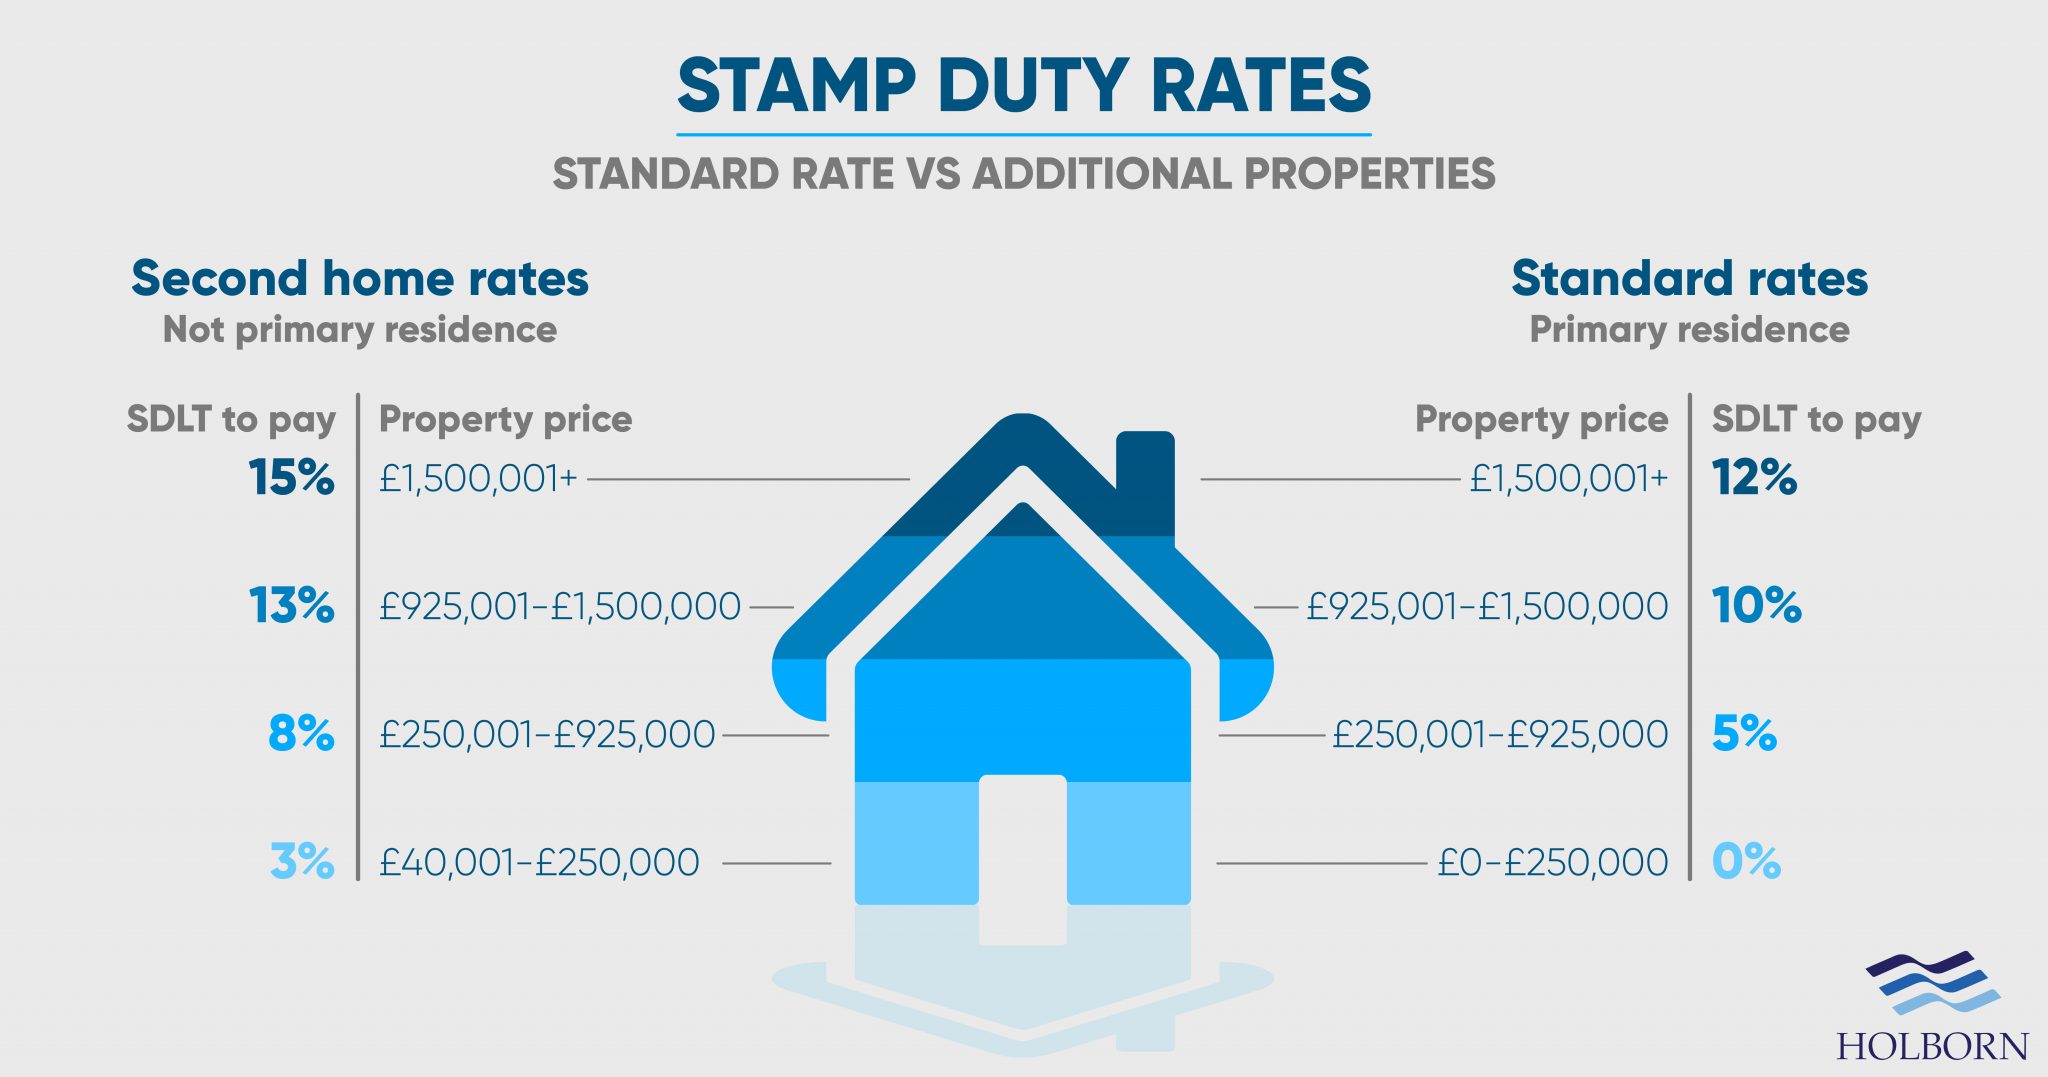 assignment stamp duty